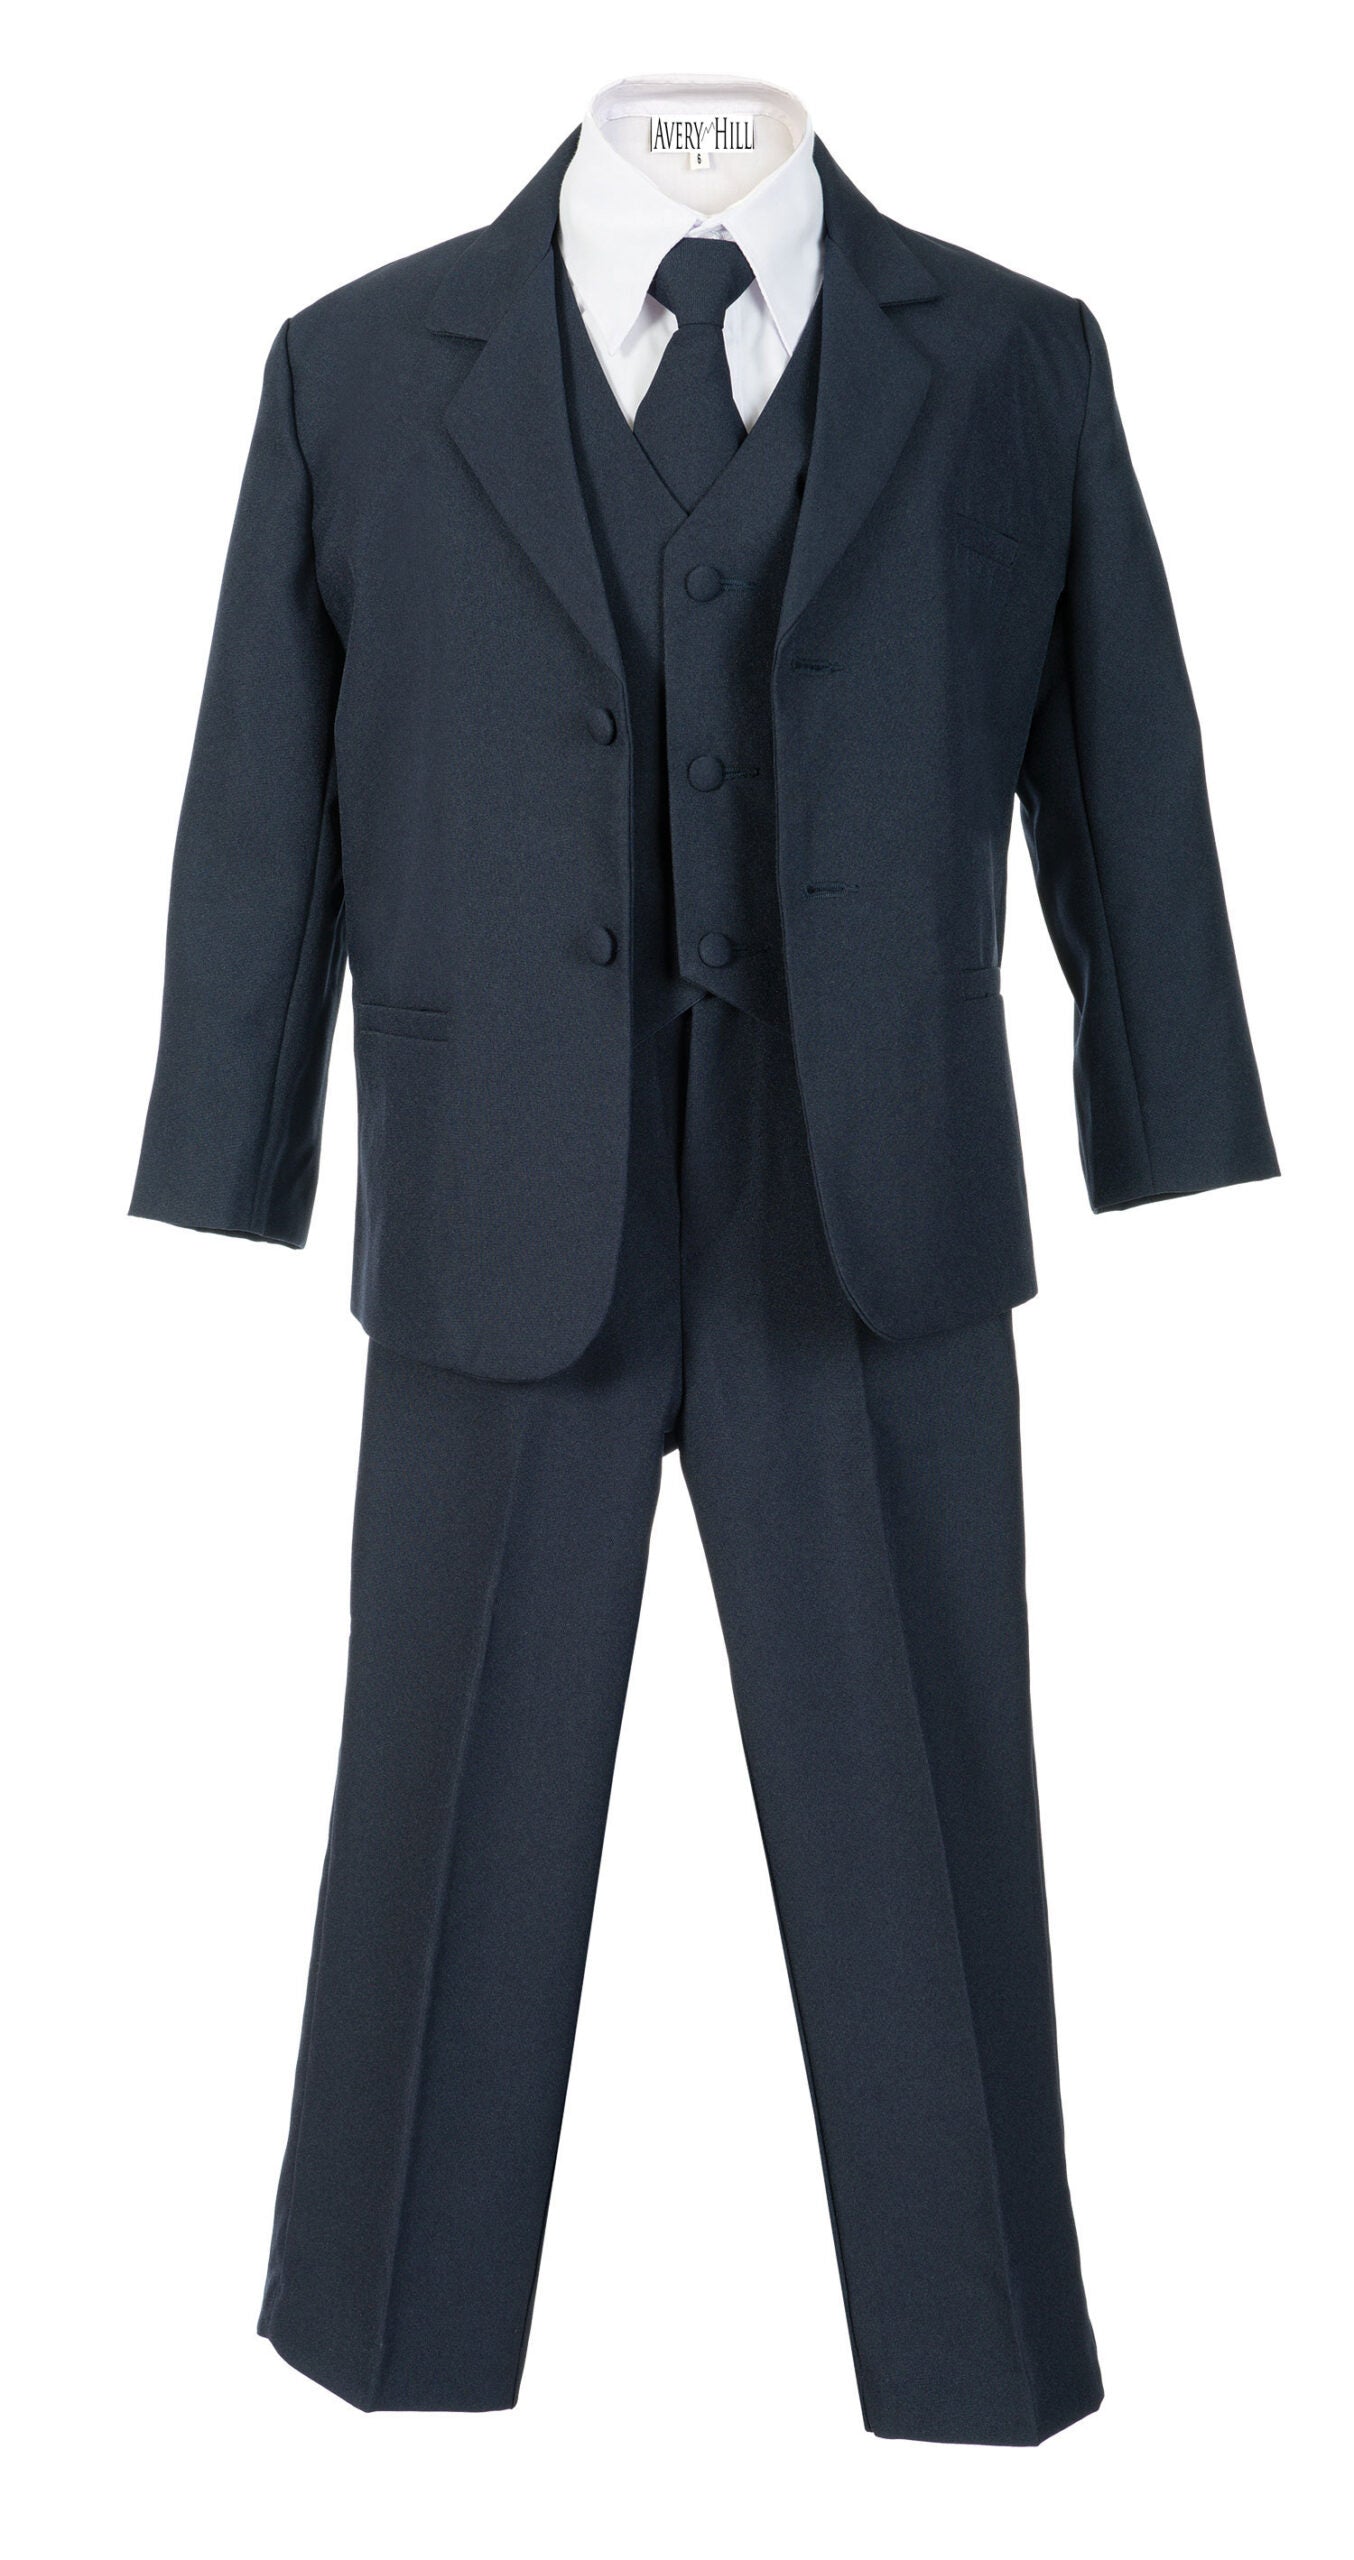 Boys Formal 5 Piece Suit with Shirt and Vest – Navy Blue - AH-BY013